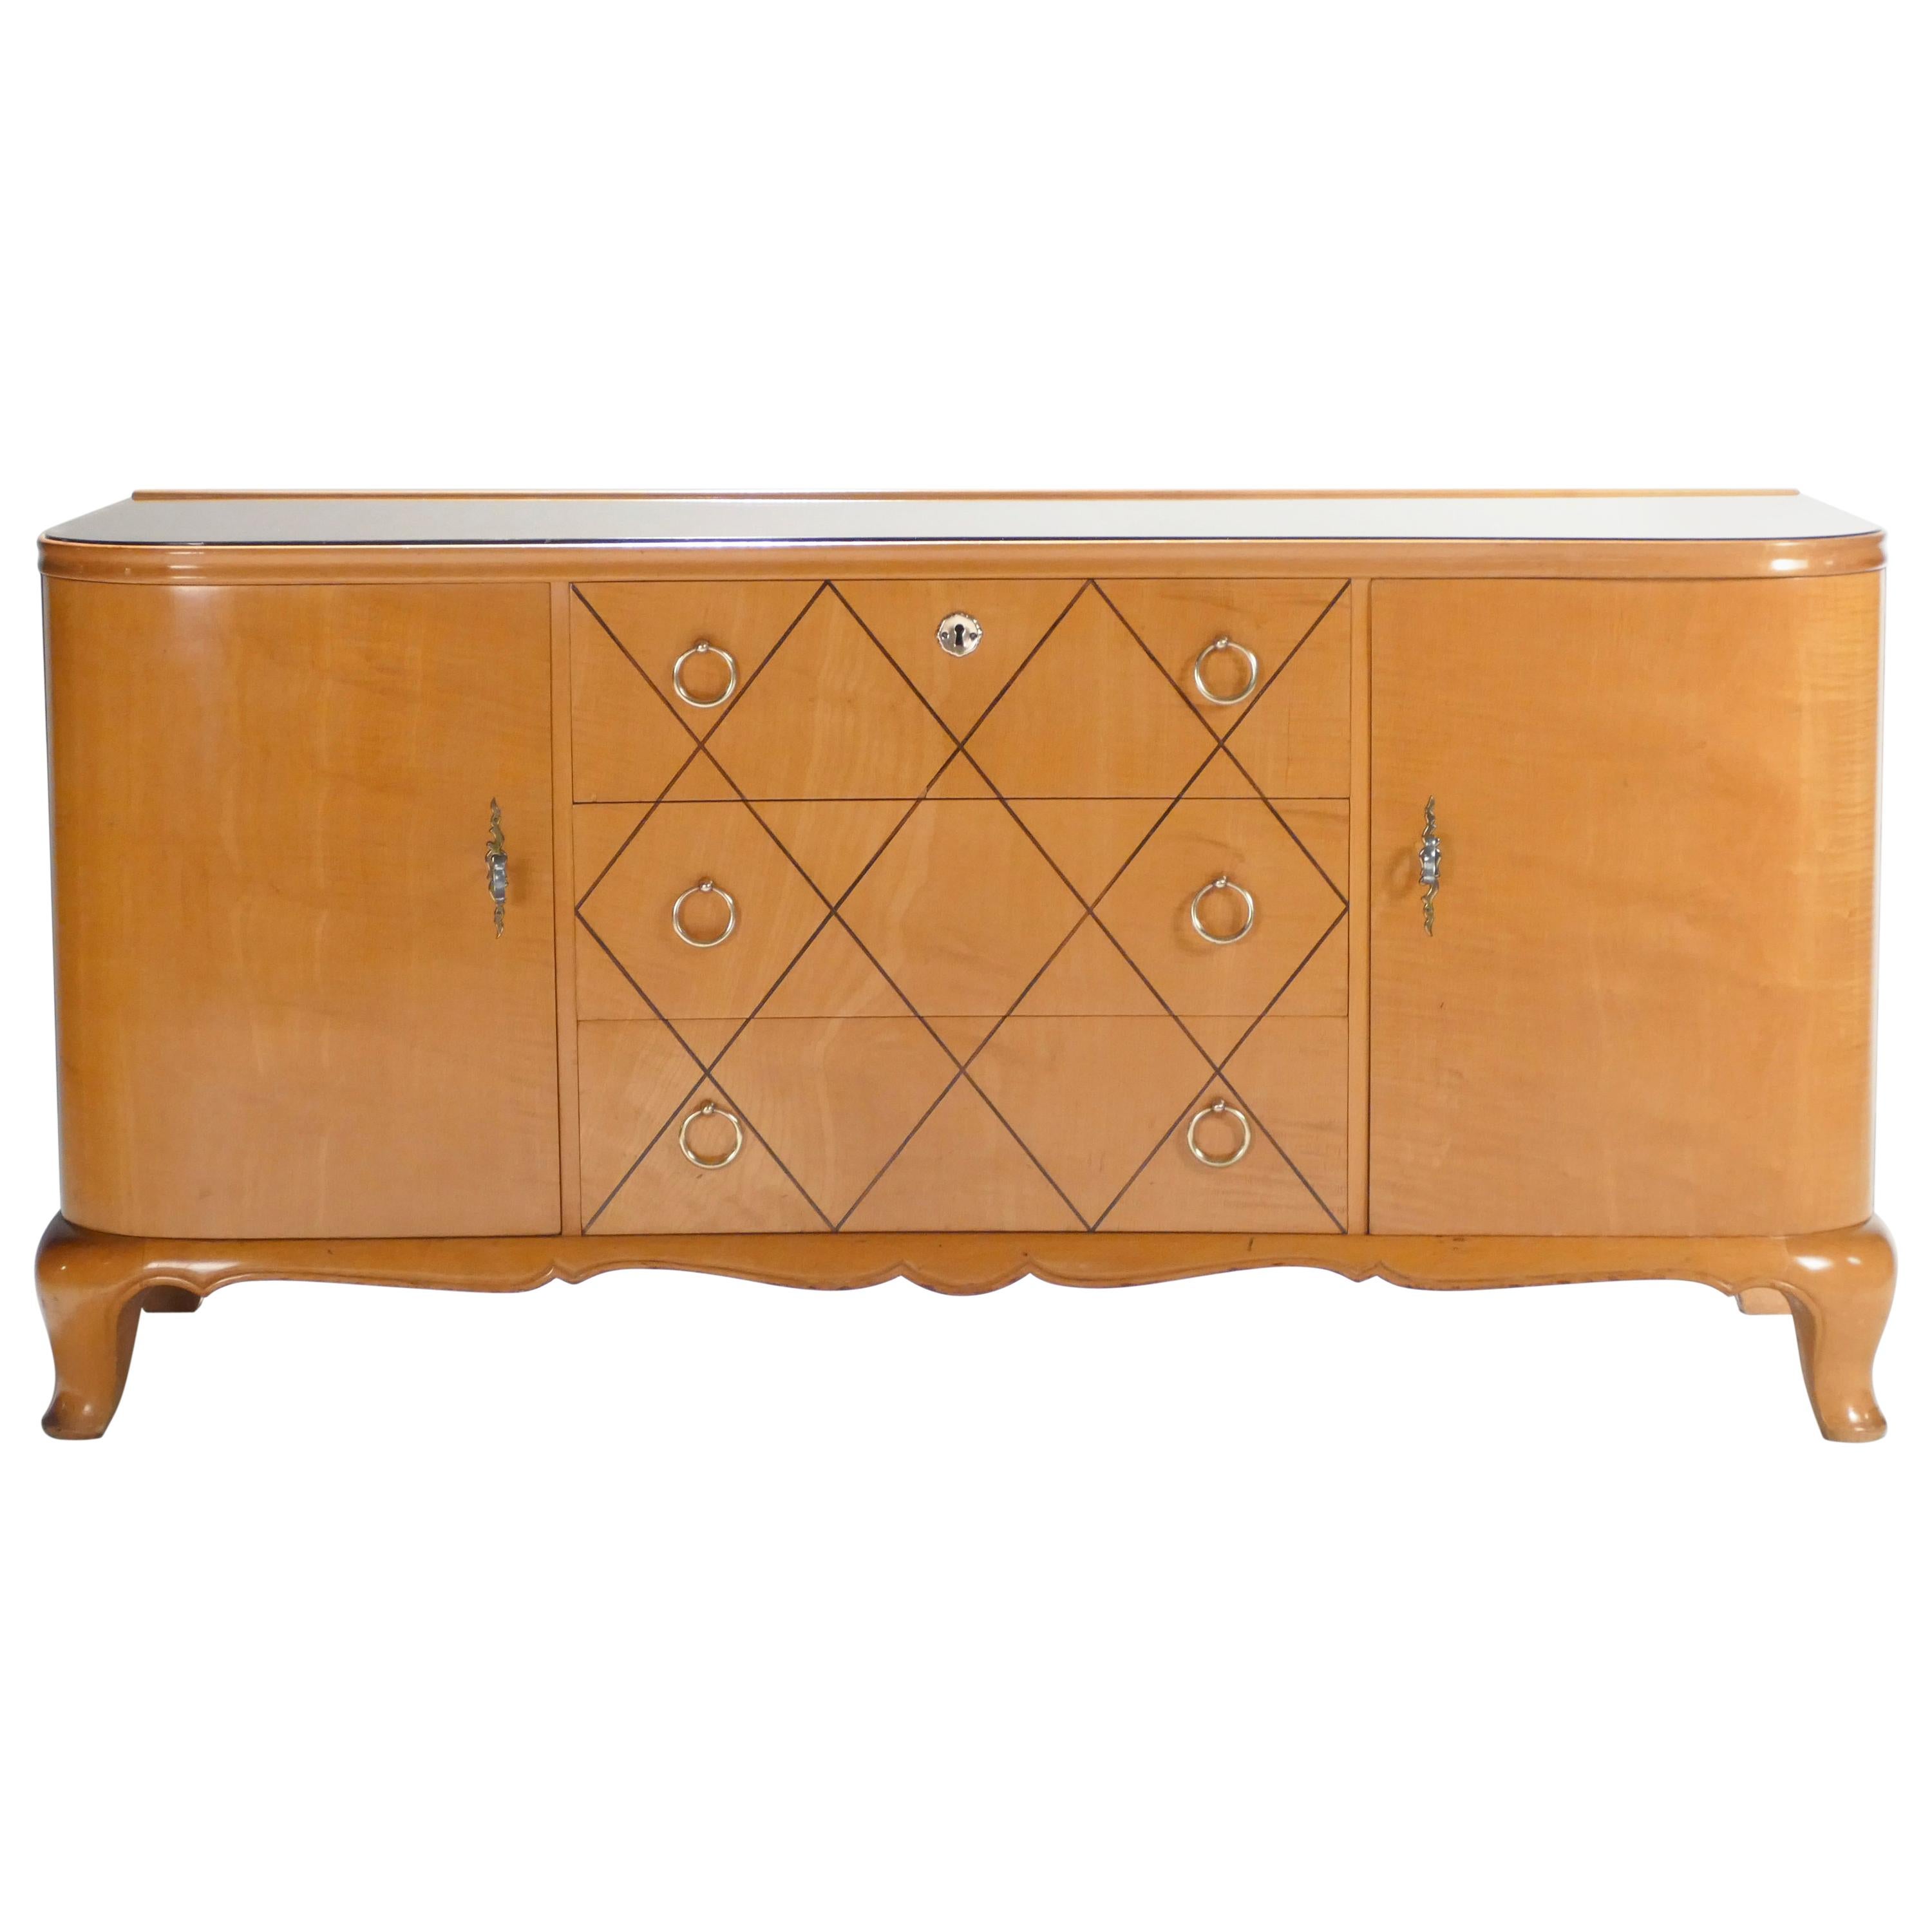 Midcentury René Prou Sycamore Brass Sideboard Commode, 1940s